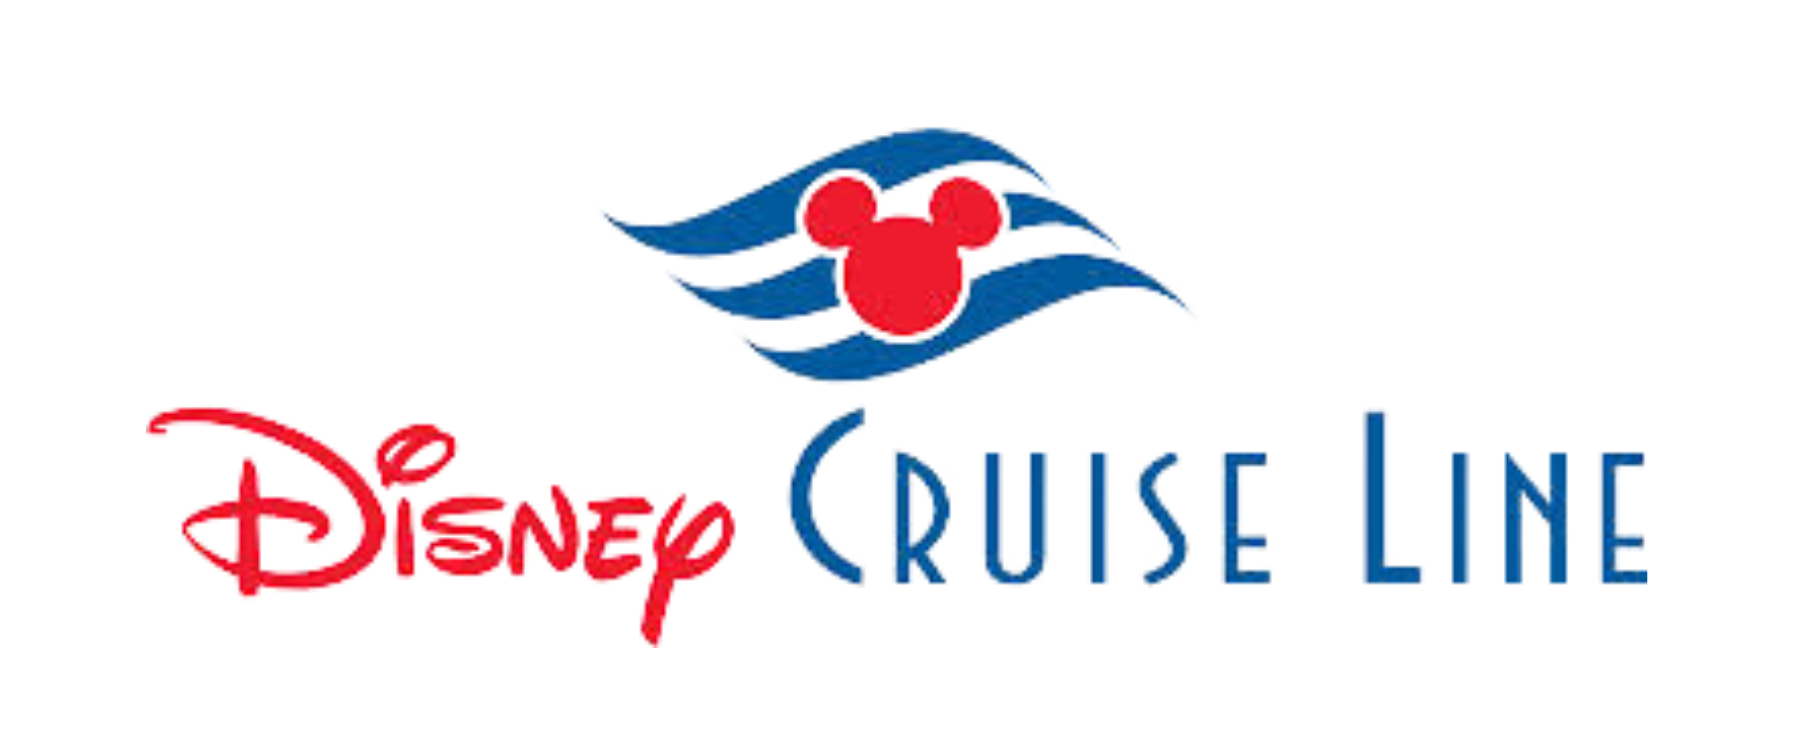 disney cruise line.png